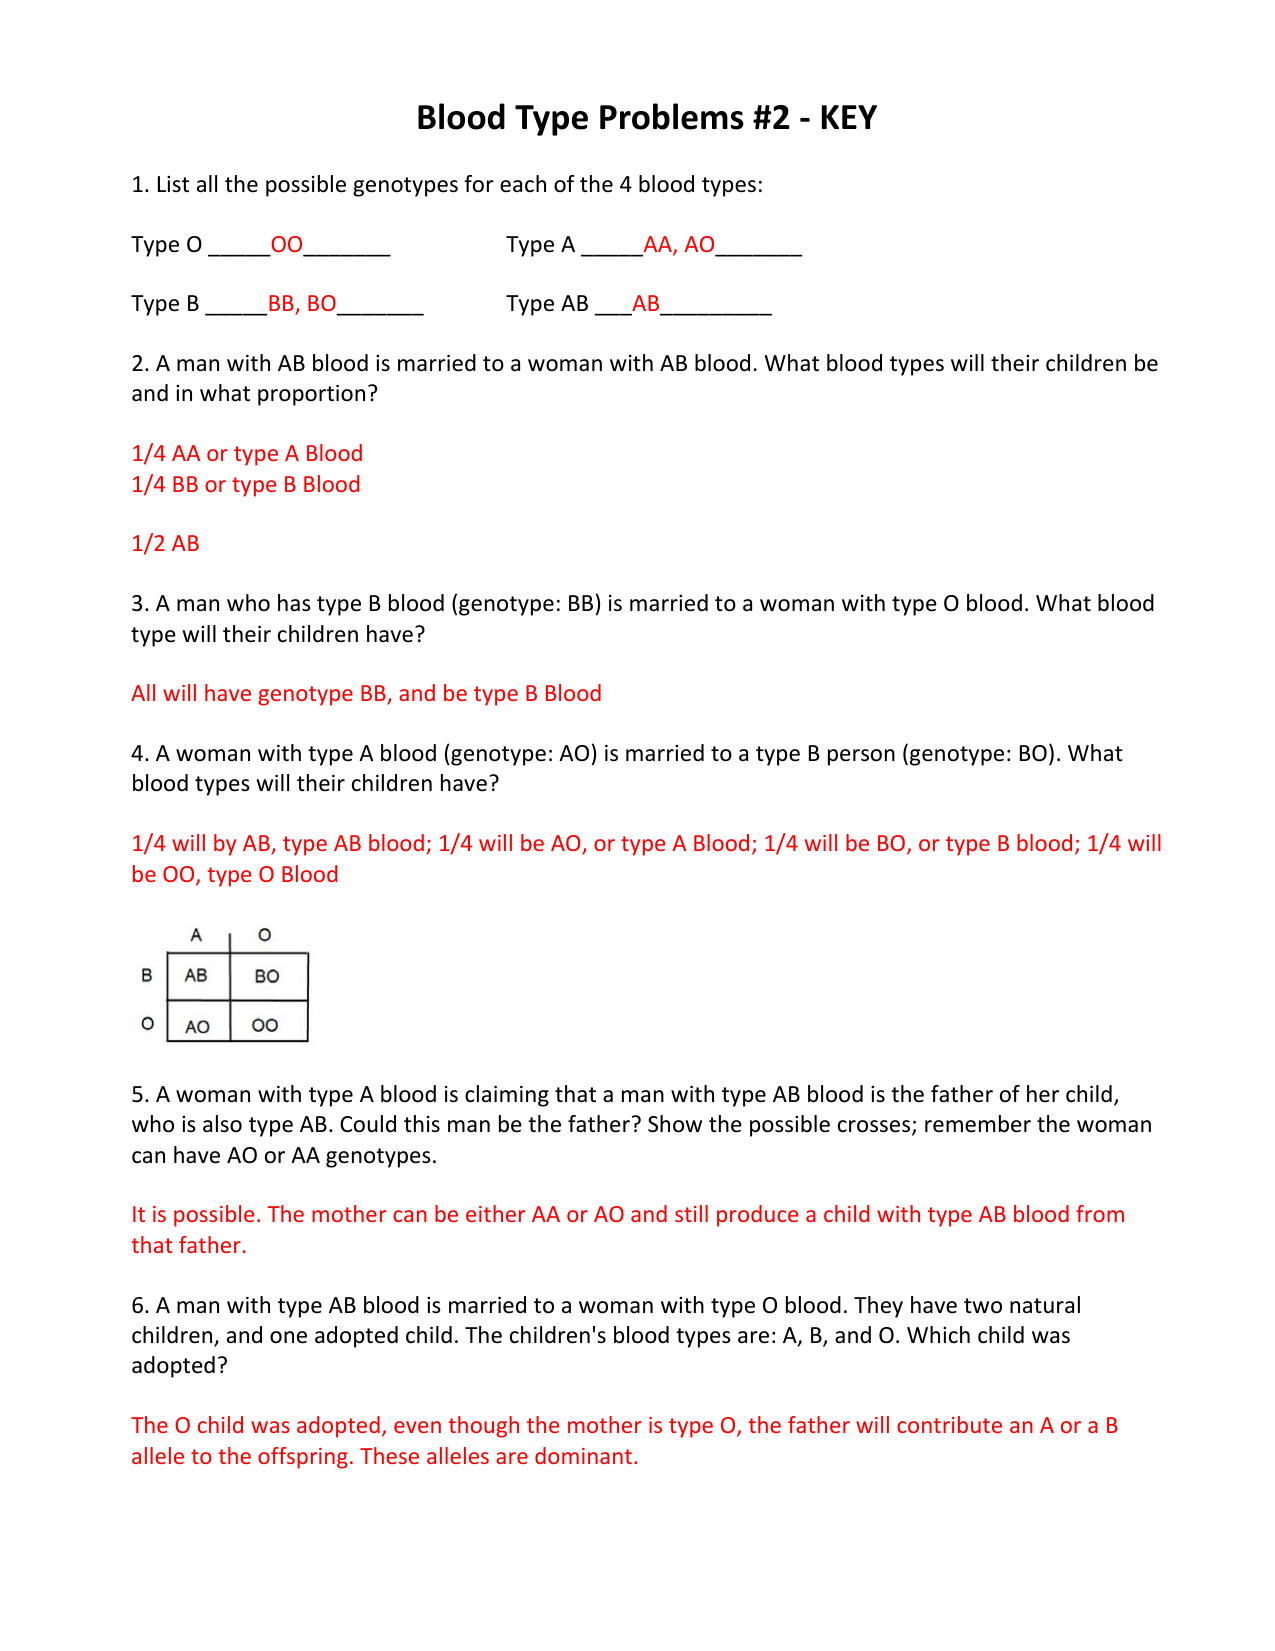 Blood Type Problems #11 Inside Blood Type And Inheritance Worksheet